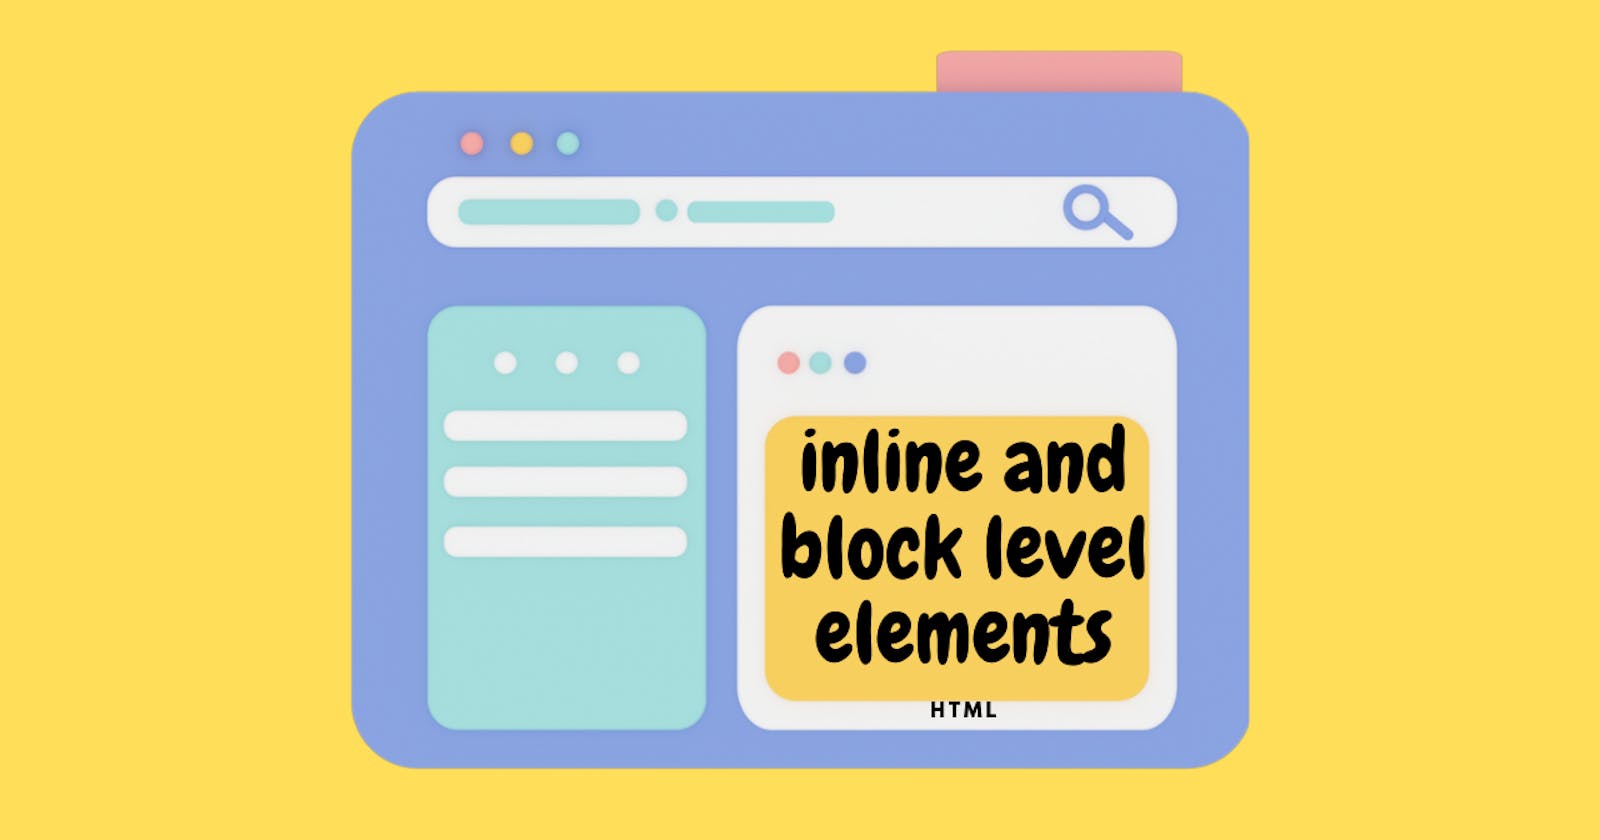 HTML - Inline and Block level elements